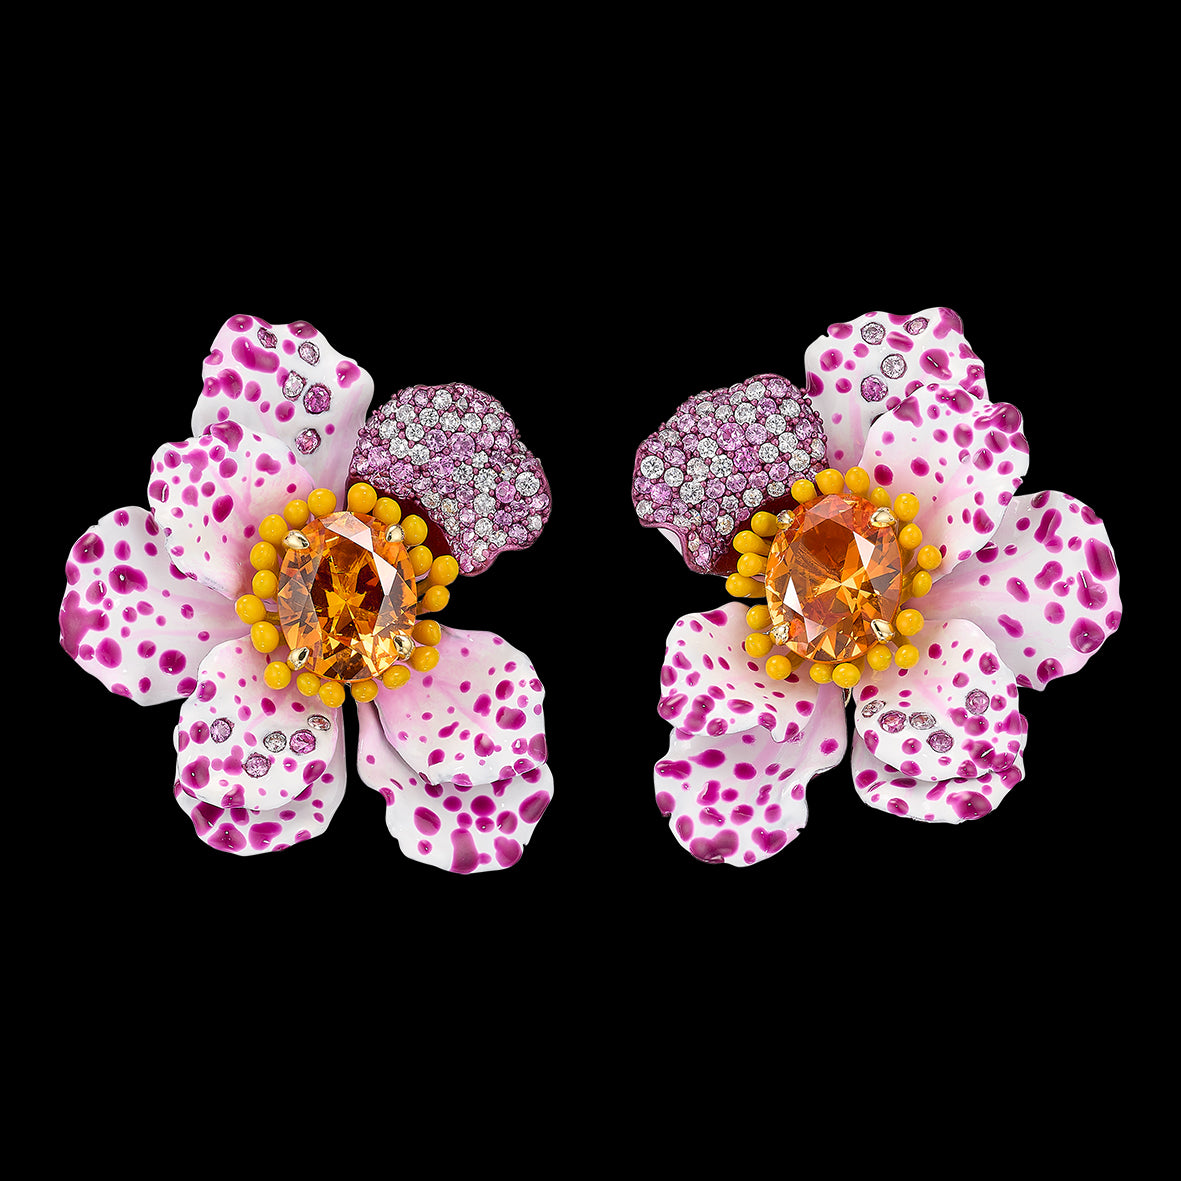 Orchid Poppy Earrings, Earrings, Anabela Chan Joaillerie - Fine jewelry with laboratory grown and created gemstones hand-crafted in the United Kingdom. Anabela Chan Joaillerie is the first fine jewellery brand in the world to champion laboratory-grown and created gemstones with high jewellery design, artisanal craftsmanship and a focus on ethical and sustainable innovations.